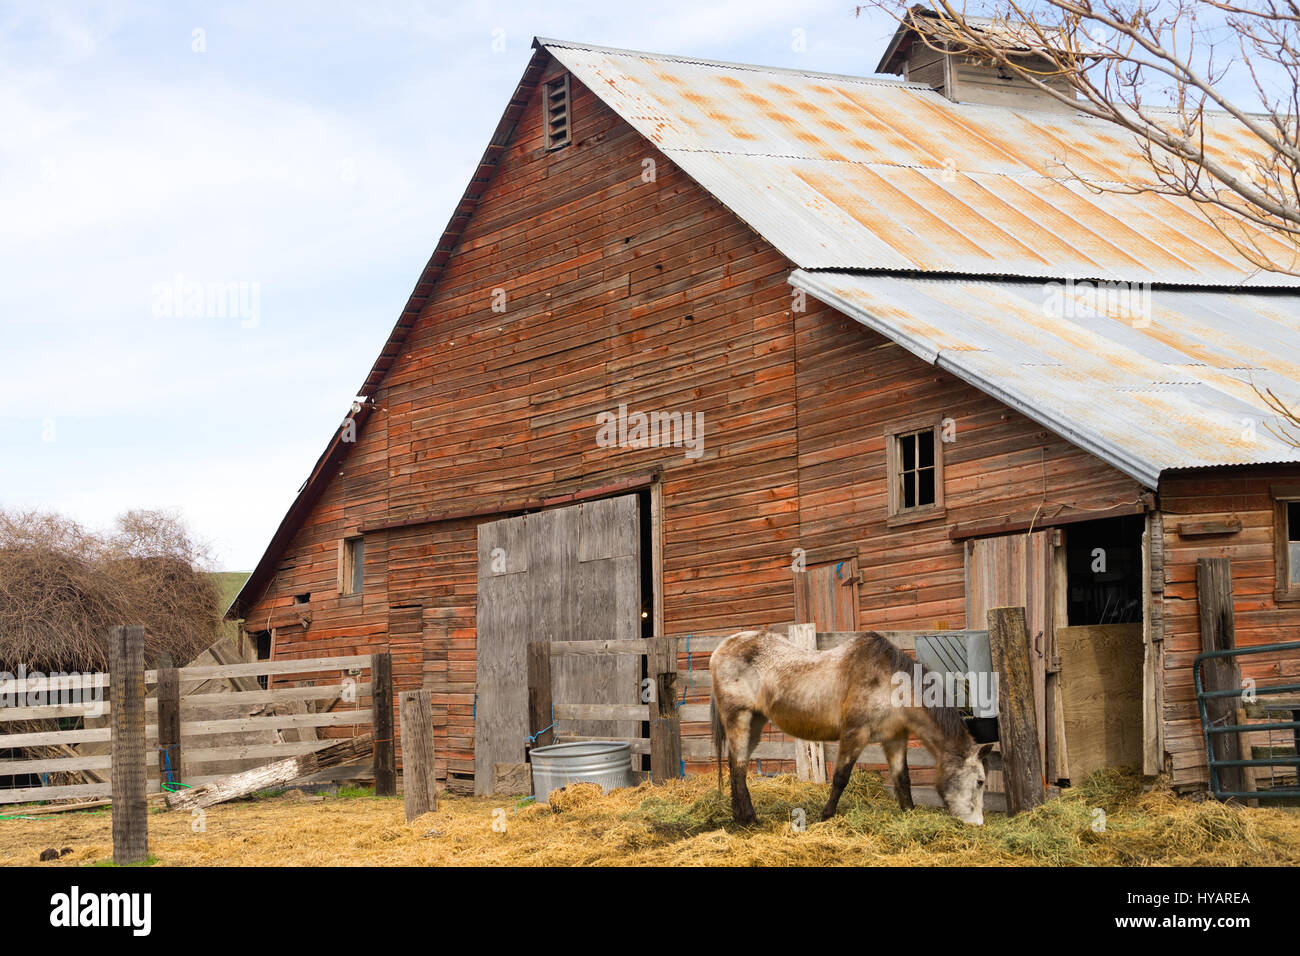 A horse was just left feed on the ranch in front of the barn Stock Photo